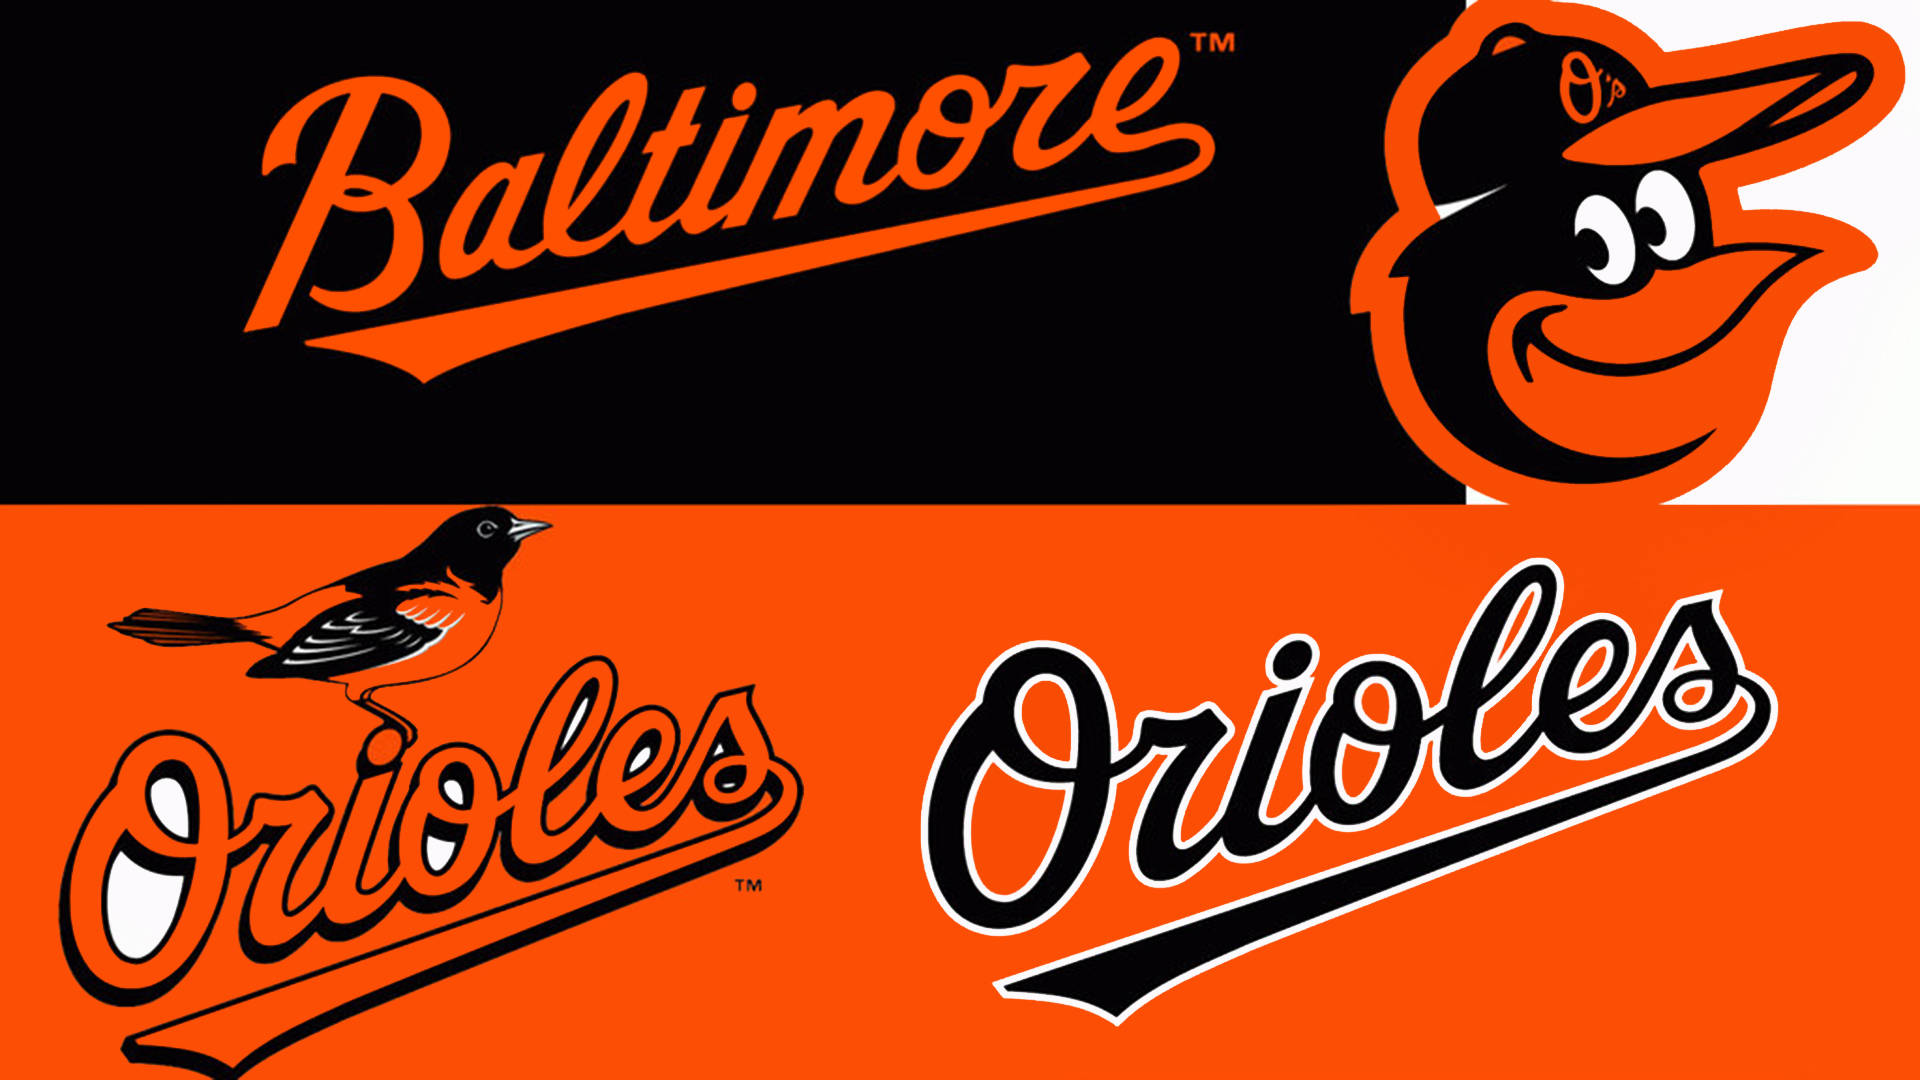 Baltimore Orioles Logo And Wordmark Background